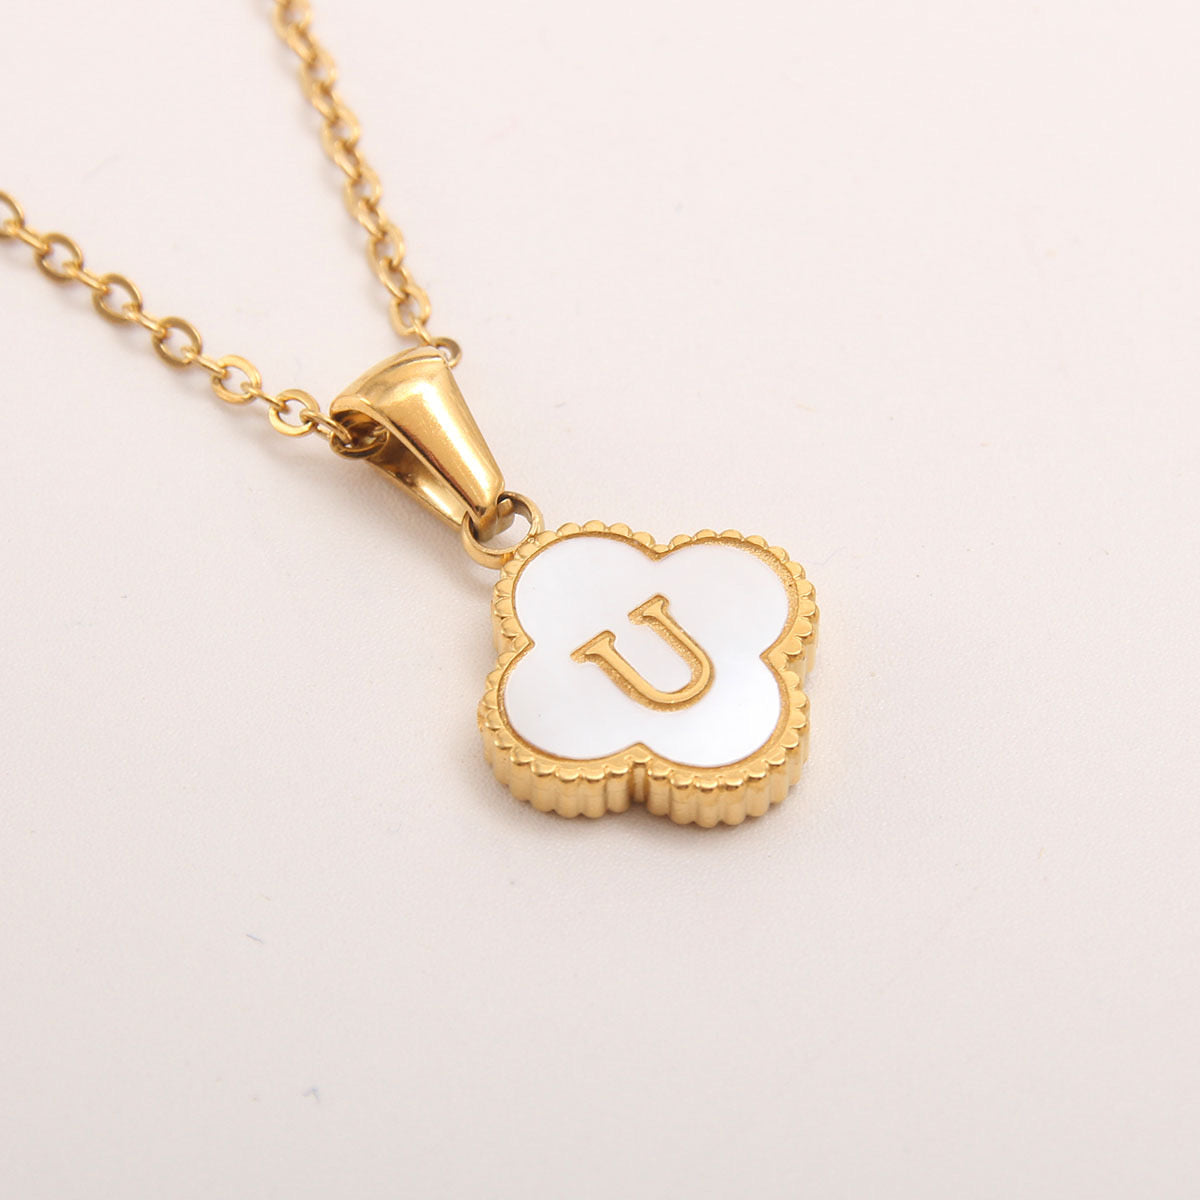 10-26pcs/lot White Shell Stainless Steel Flower Initial Necklaces Necklaces Charms Beads Beyond